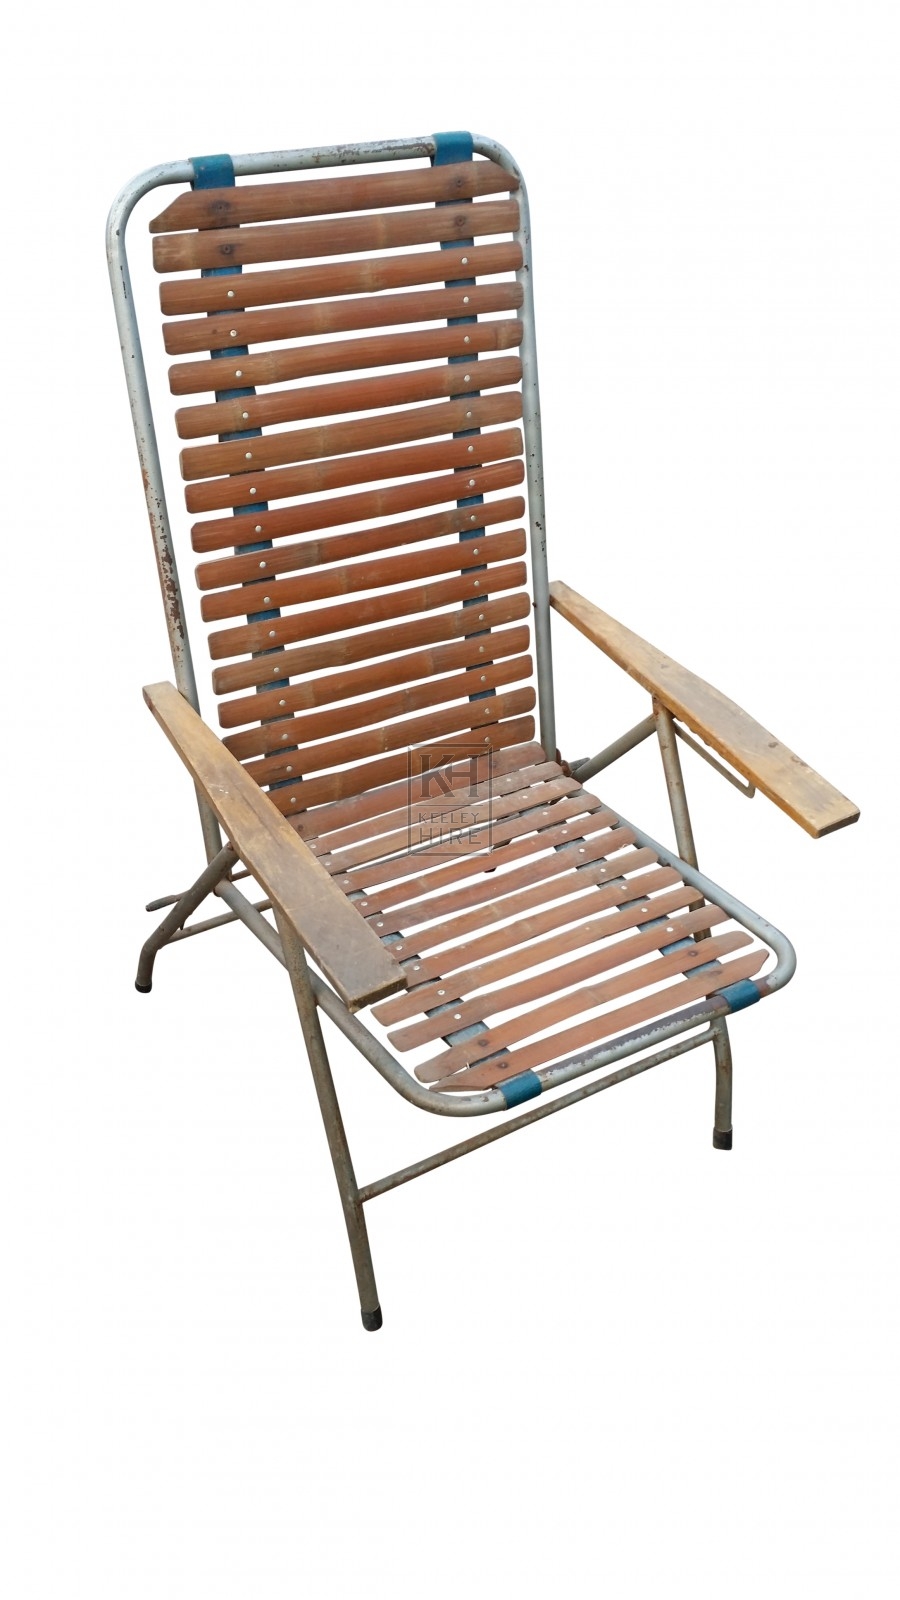 Slatted deck chair